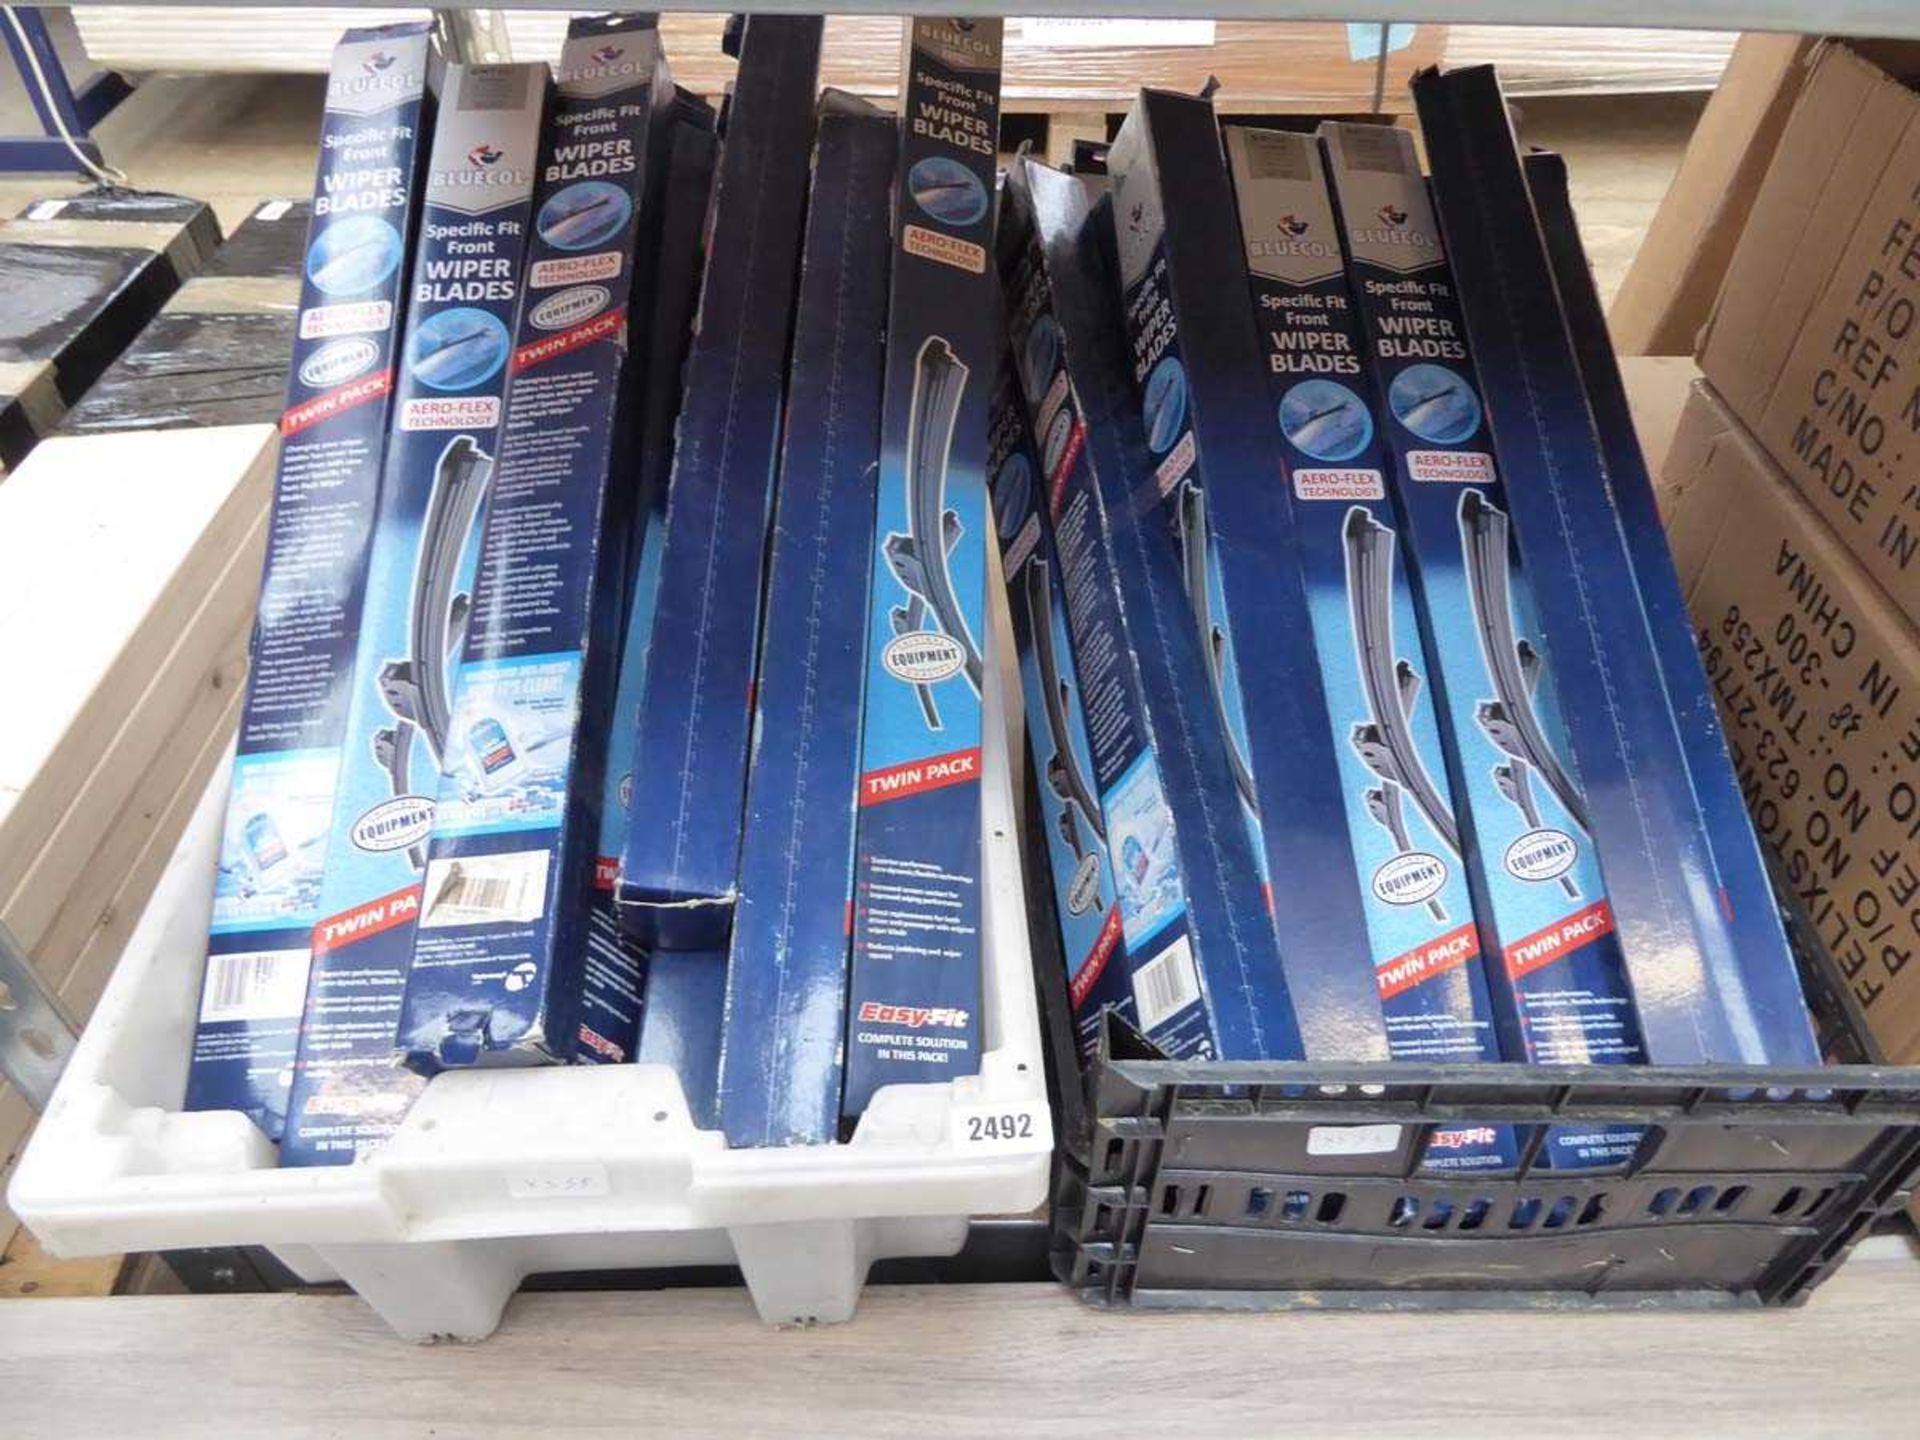 2 crates of Bluecol wiper blades in mixed sizes